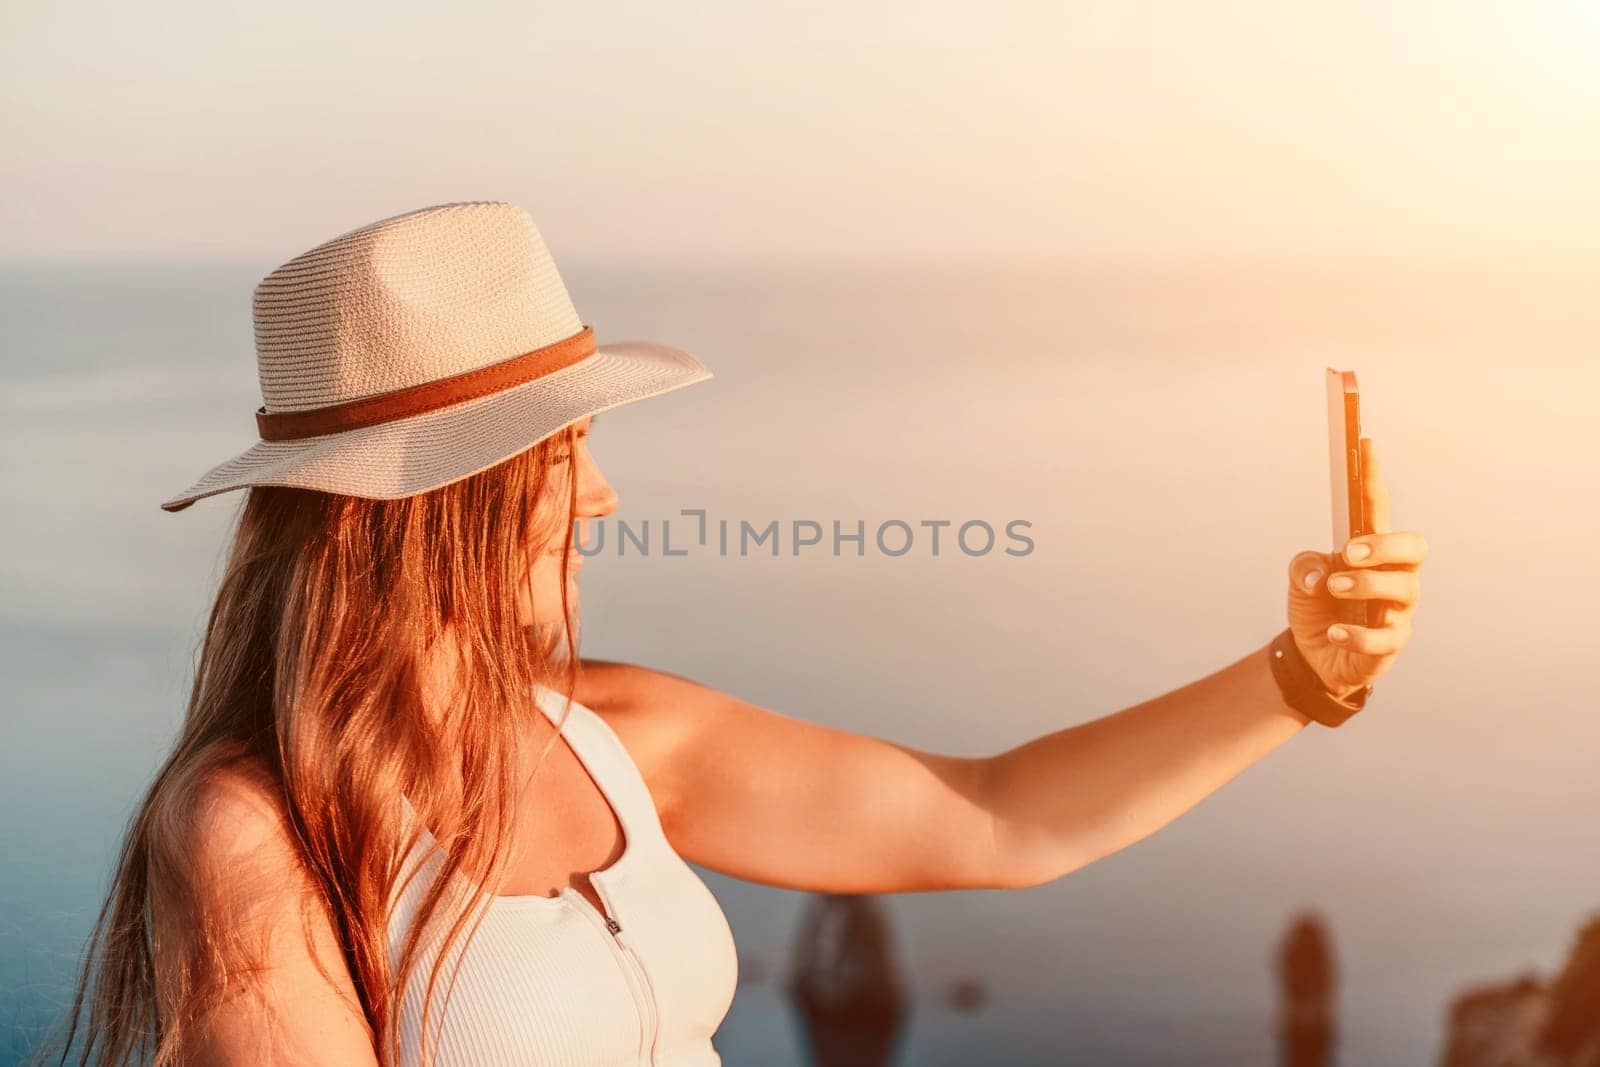 Selfie woman in a hat, white tank top, and shorts captures a selfie shot with her mobile phone against the backdrop of a serene beach and blue sea. by Matiunina